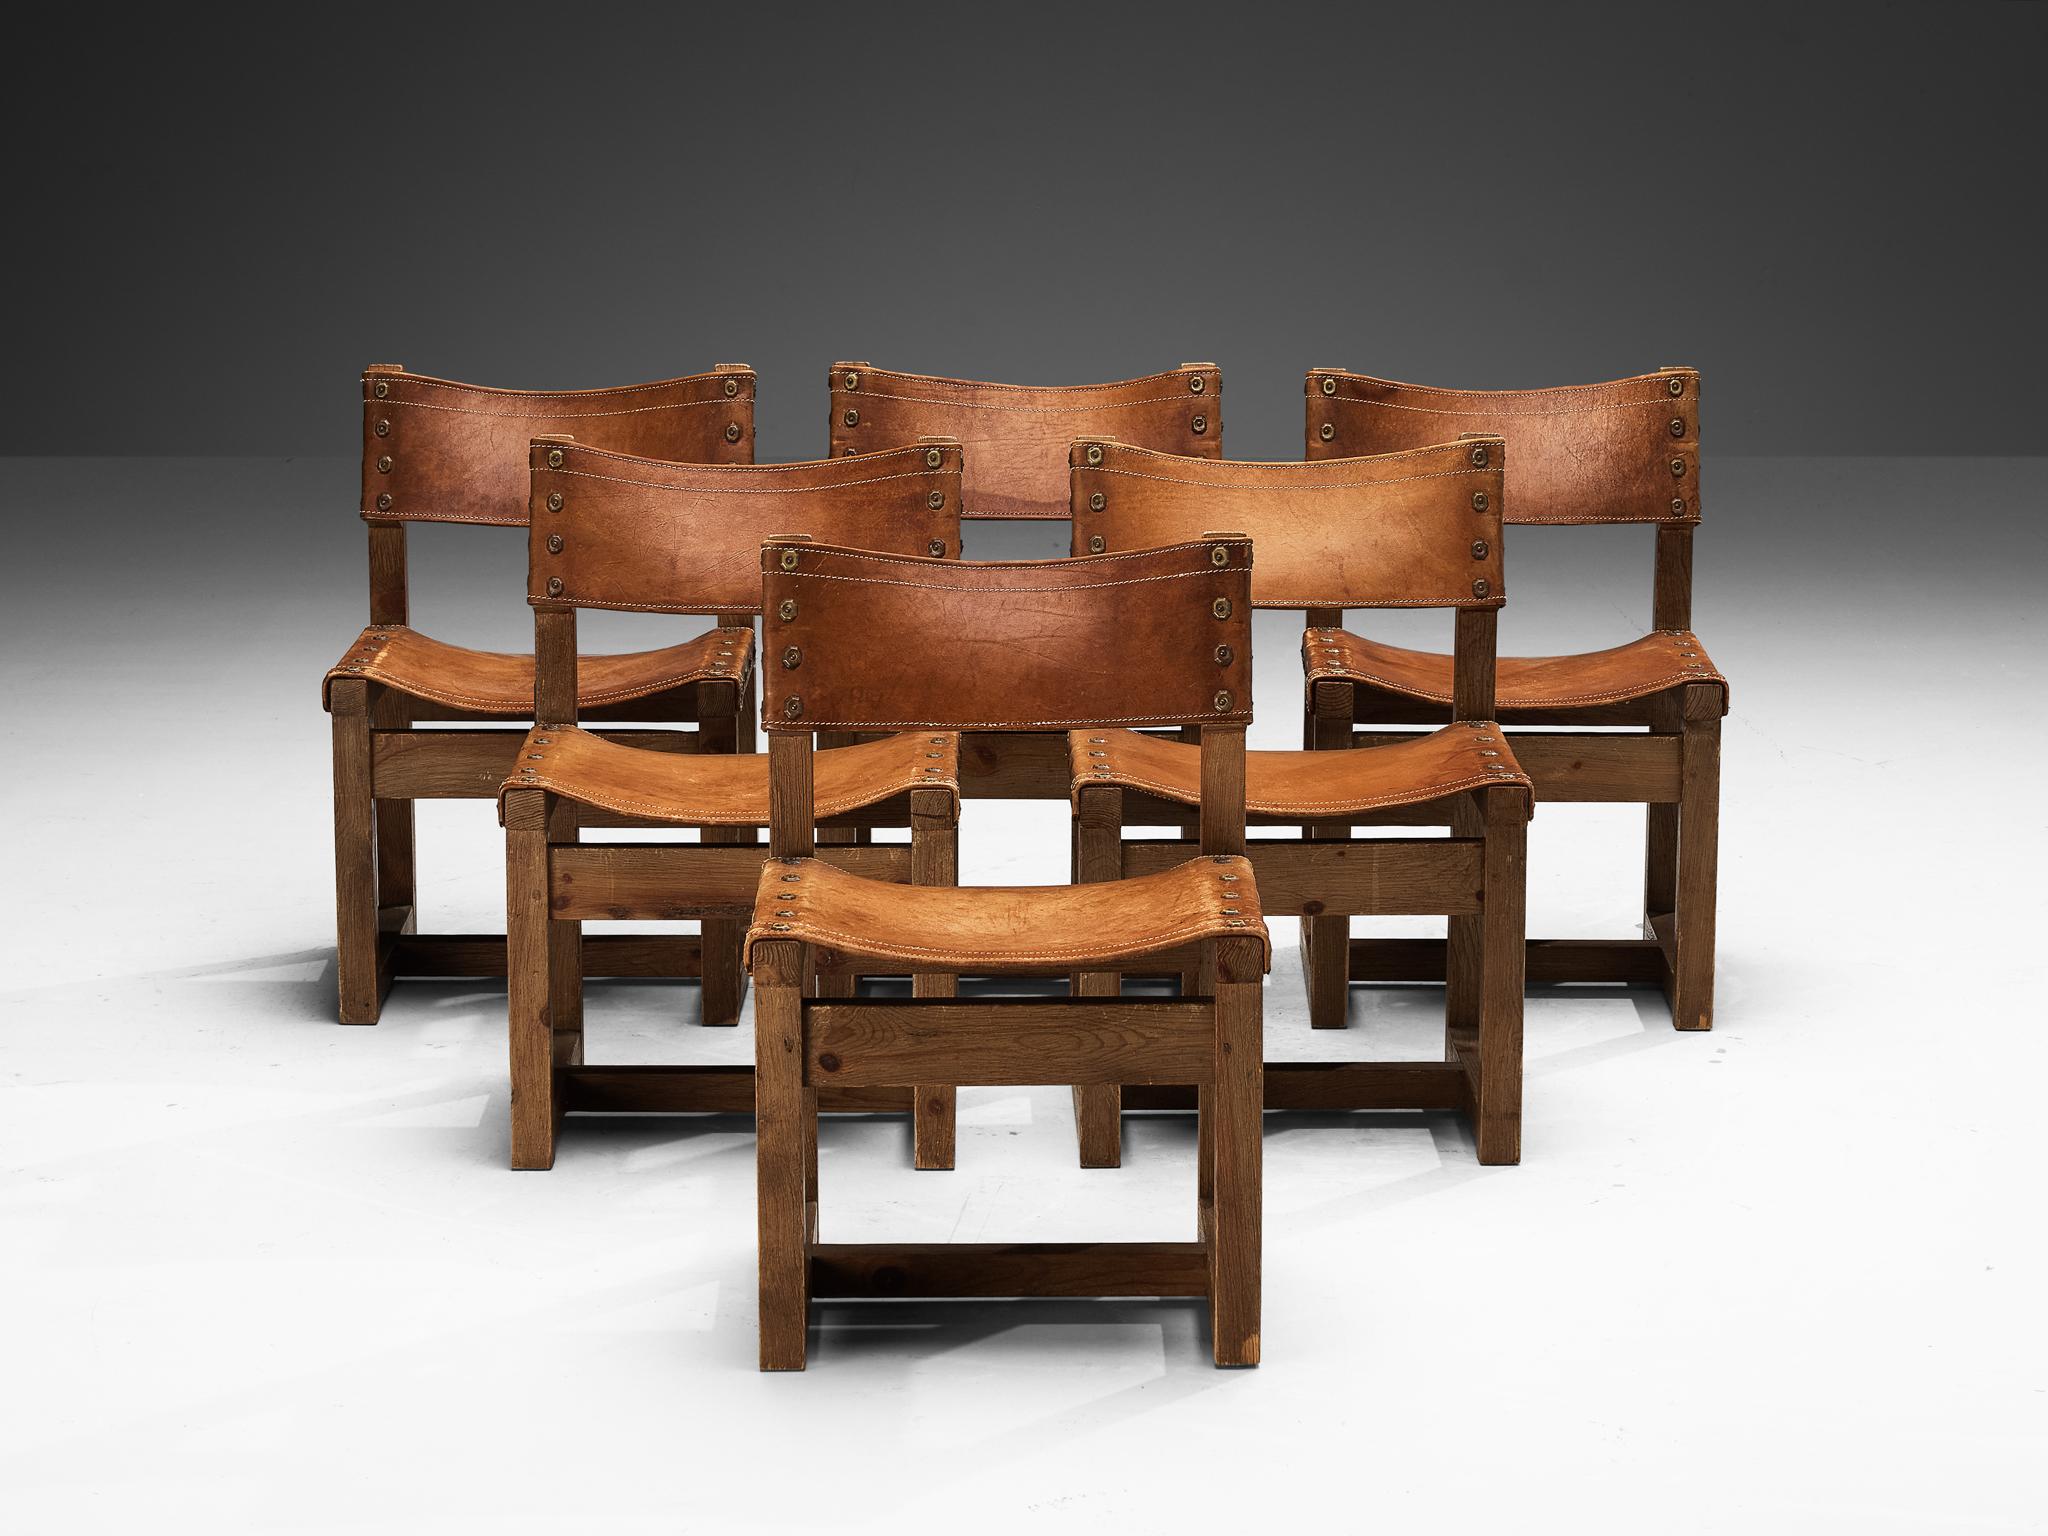 Brass Biosca Brutalist Spanish Dining Chairs in Leather and Oak  For Sale